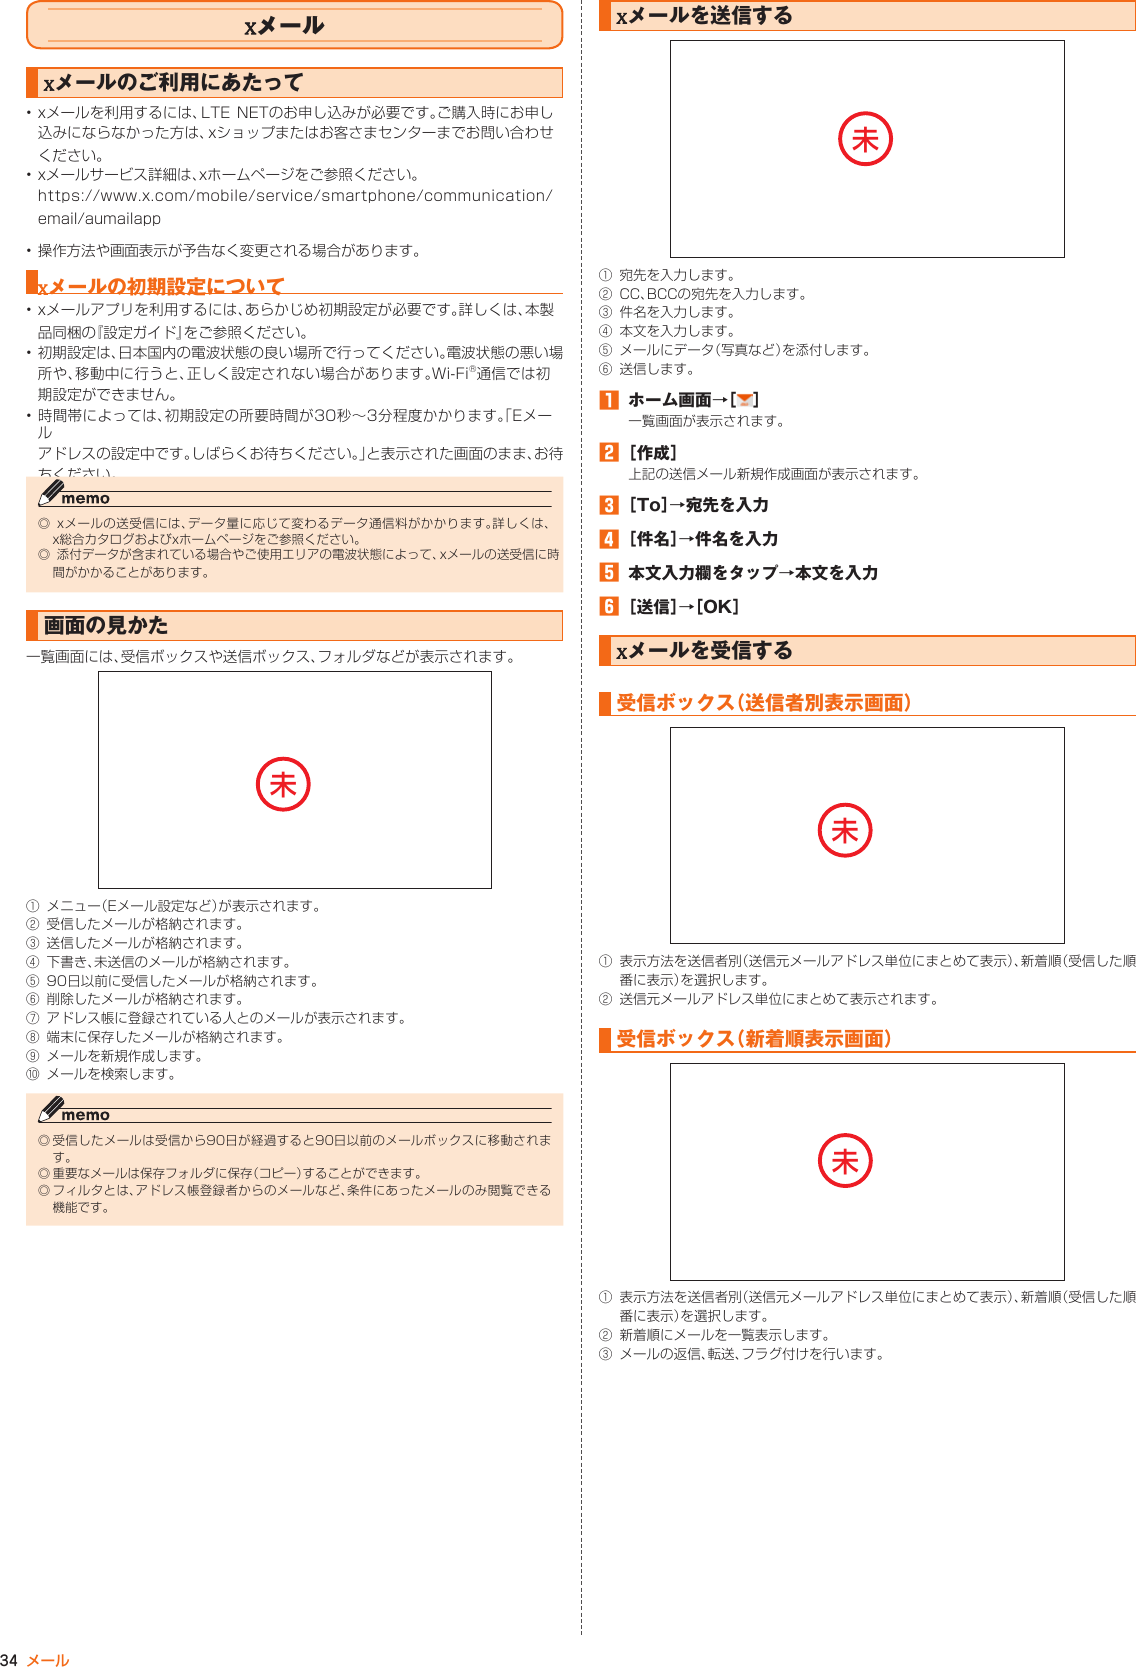 Page 35 of Kyocera FA85 Tablet User Manual 2